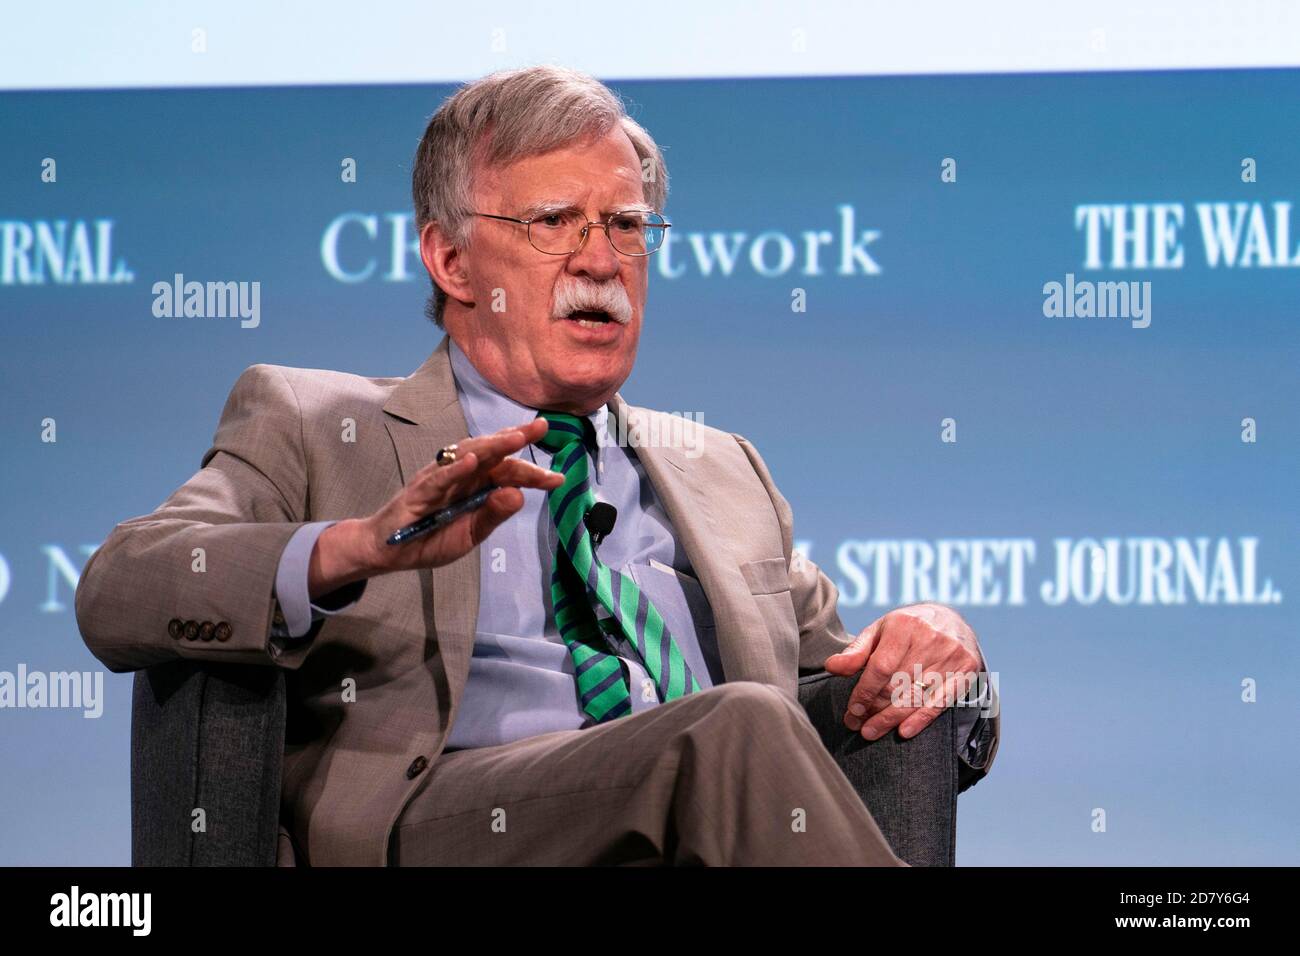 John Bolton, national security advisor, speaks during the Wall Street Journal CFO Network conference in Washington, D.C., U.S., on Tuesday, June 11, 2019. Panelists will discuss how rules governing financial reporting and corporate behavior will change and explore the mergers and acquisition landscape and corporate activism. Credit: Alex Edelman/The Photo Access Stock Photo